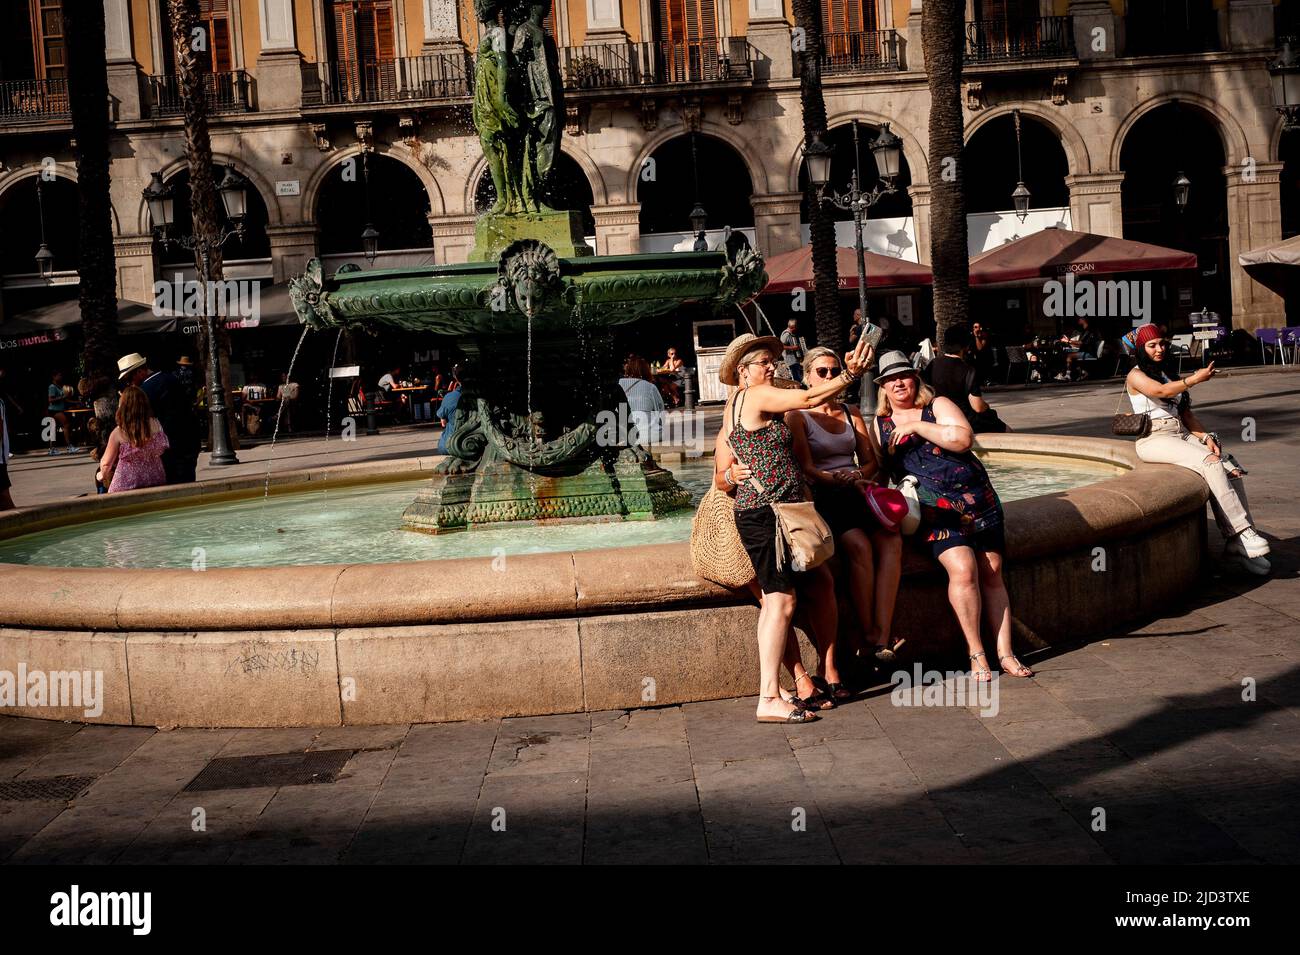 Barcelona, Spain. 17th June, 2022. June 17, 2022, Barcelona, Spain: Tourists take a selfie next to a fountain in the Plaza Real of Barcelona as a heat wave is underway in parts of Western Europe, with widespread temperatures near or above 104 degrees Fahrenheit (40 Celsius) expected through the weekend. Current heatwave brings abnormally high temperatures for June days in Spain. Credit:  Jordi Boixareu/Alamy Live News Credit:  Jordi Boixareu/Alamy Live News Stock Photo